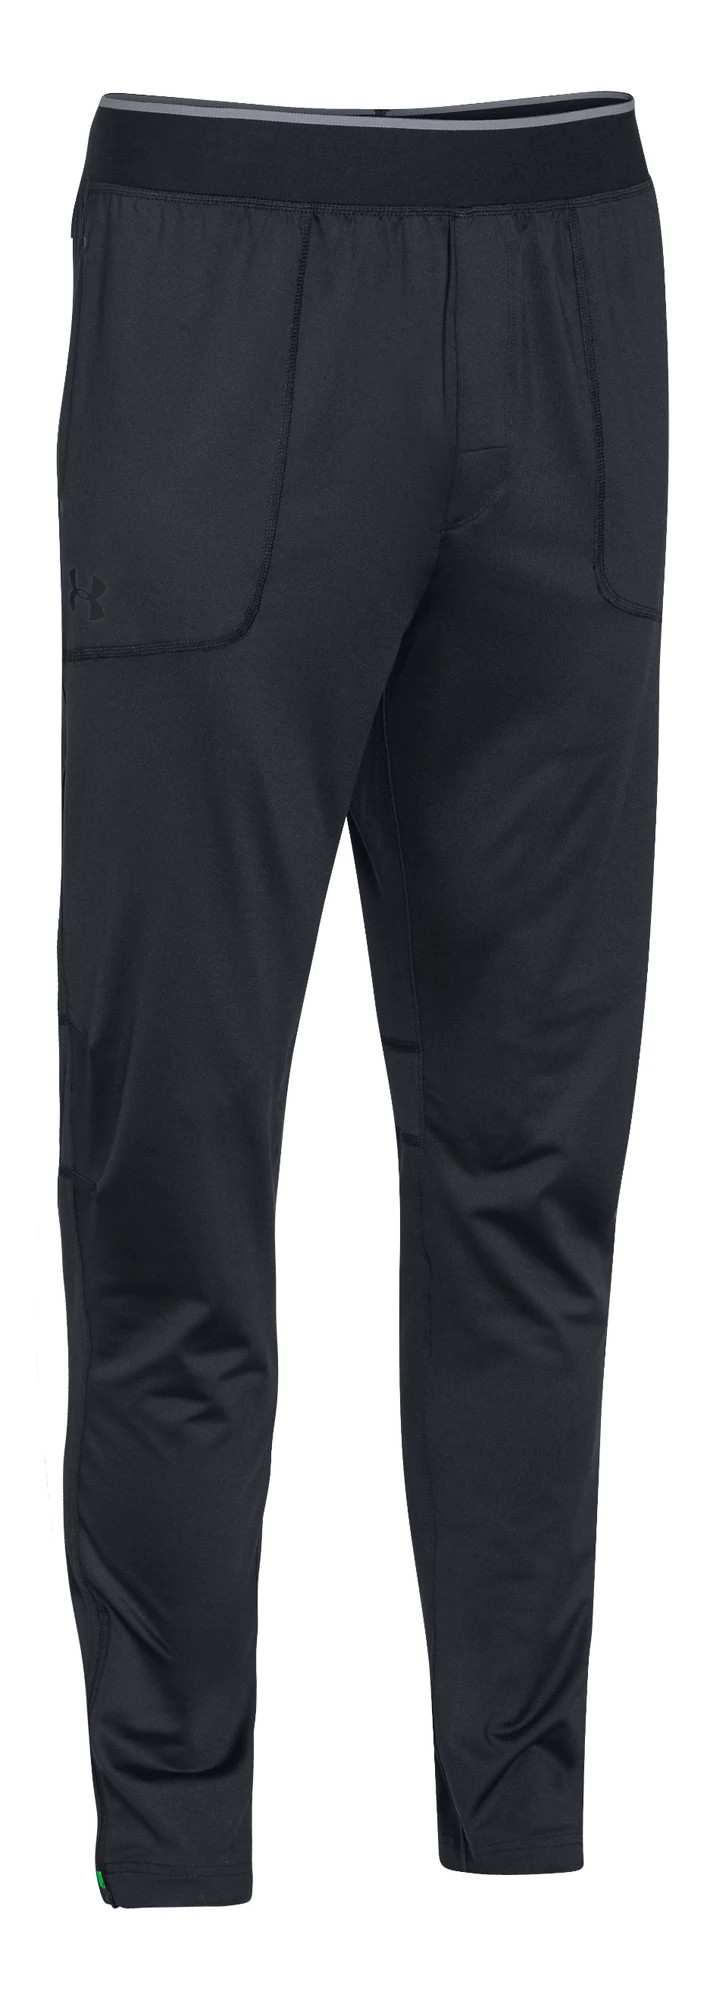 Mens Under Armour Elevated Tapered Knit Warm-Up Pants